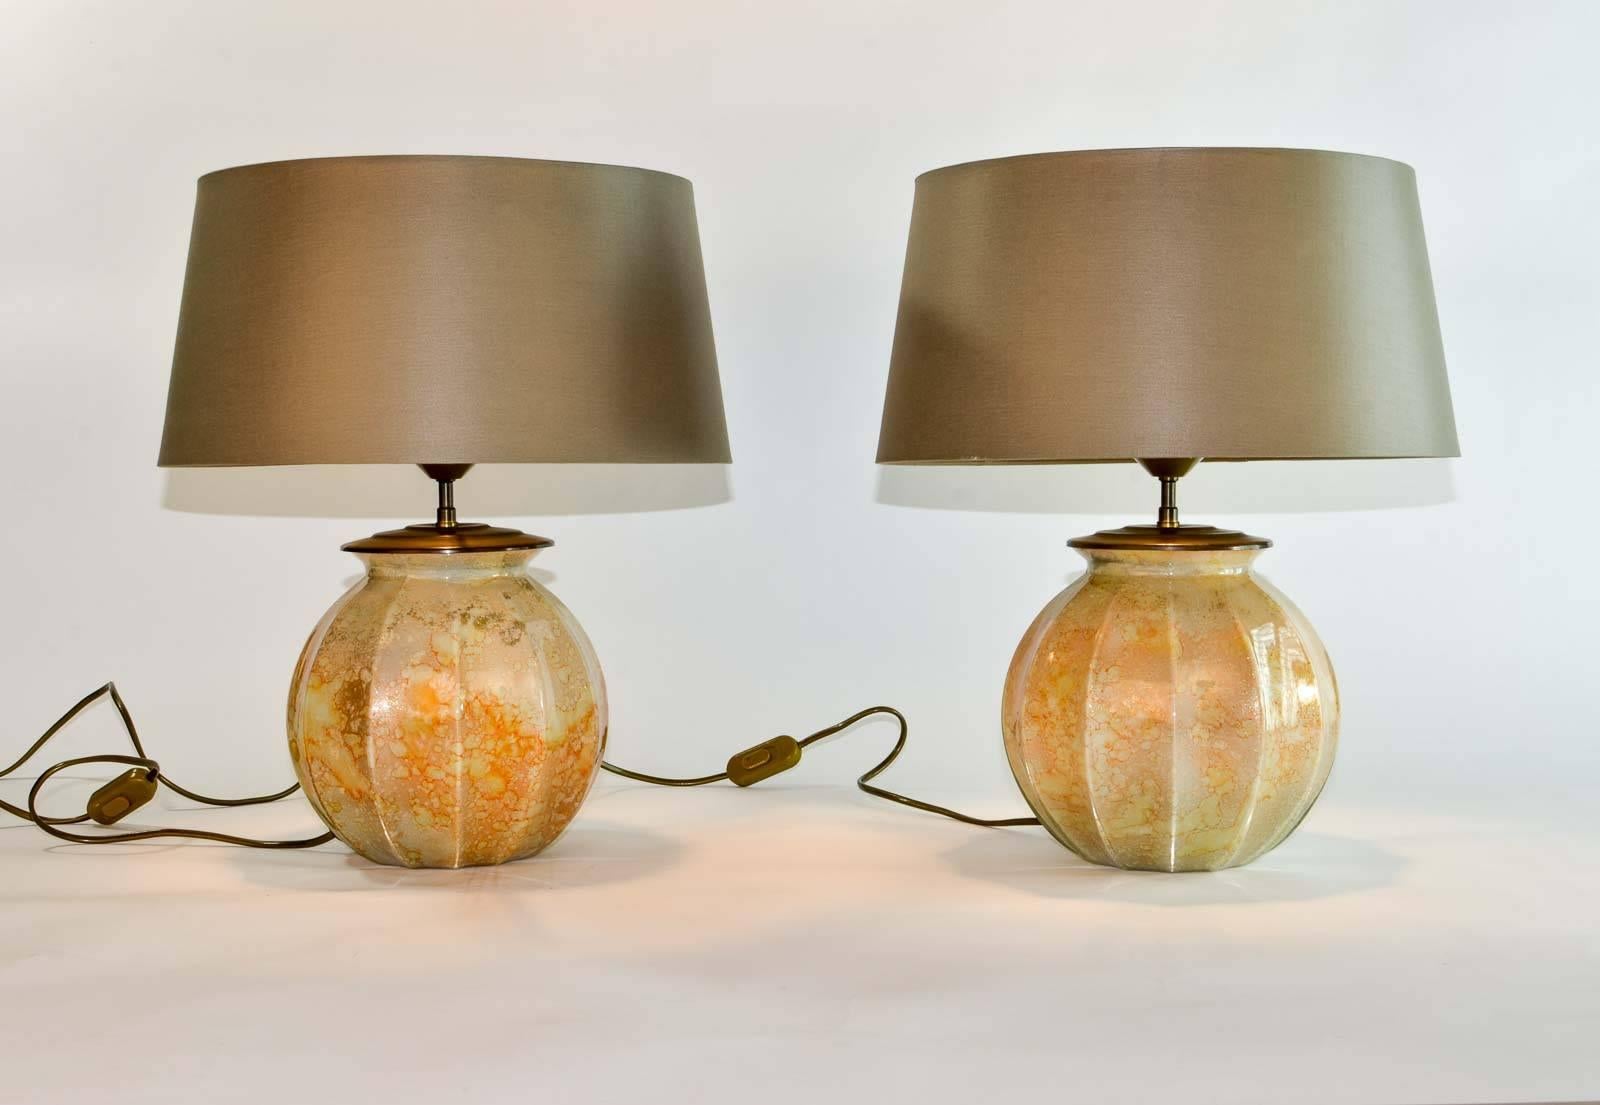 Stunning pair of French handmade glass Laque Line table lamps, 1970s.
The marbled glass foot shows nice color glows of orange, caramel, cream and golddust.
They make a very warm combination with the warm grey colored lampshade on top. Both lamps